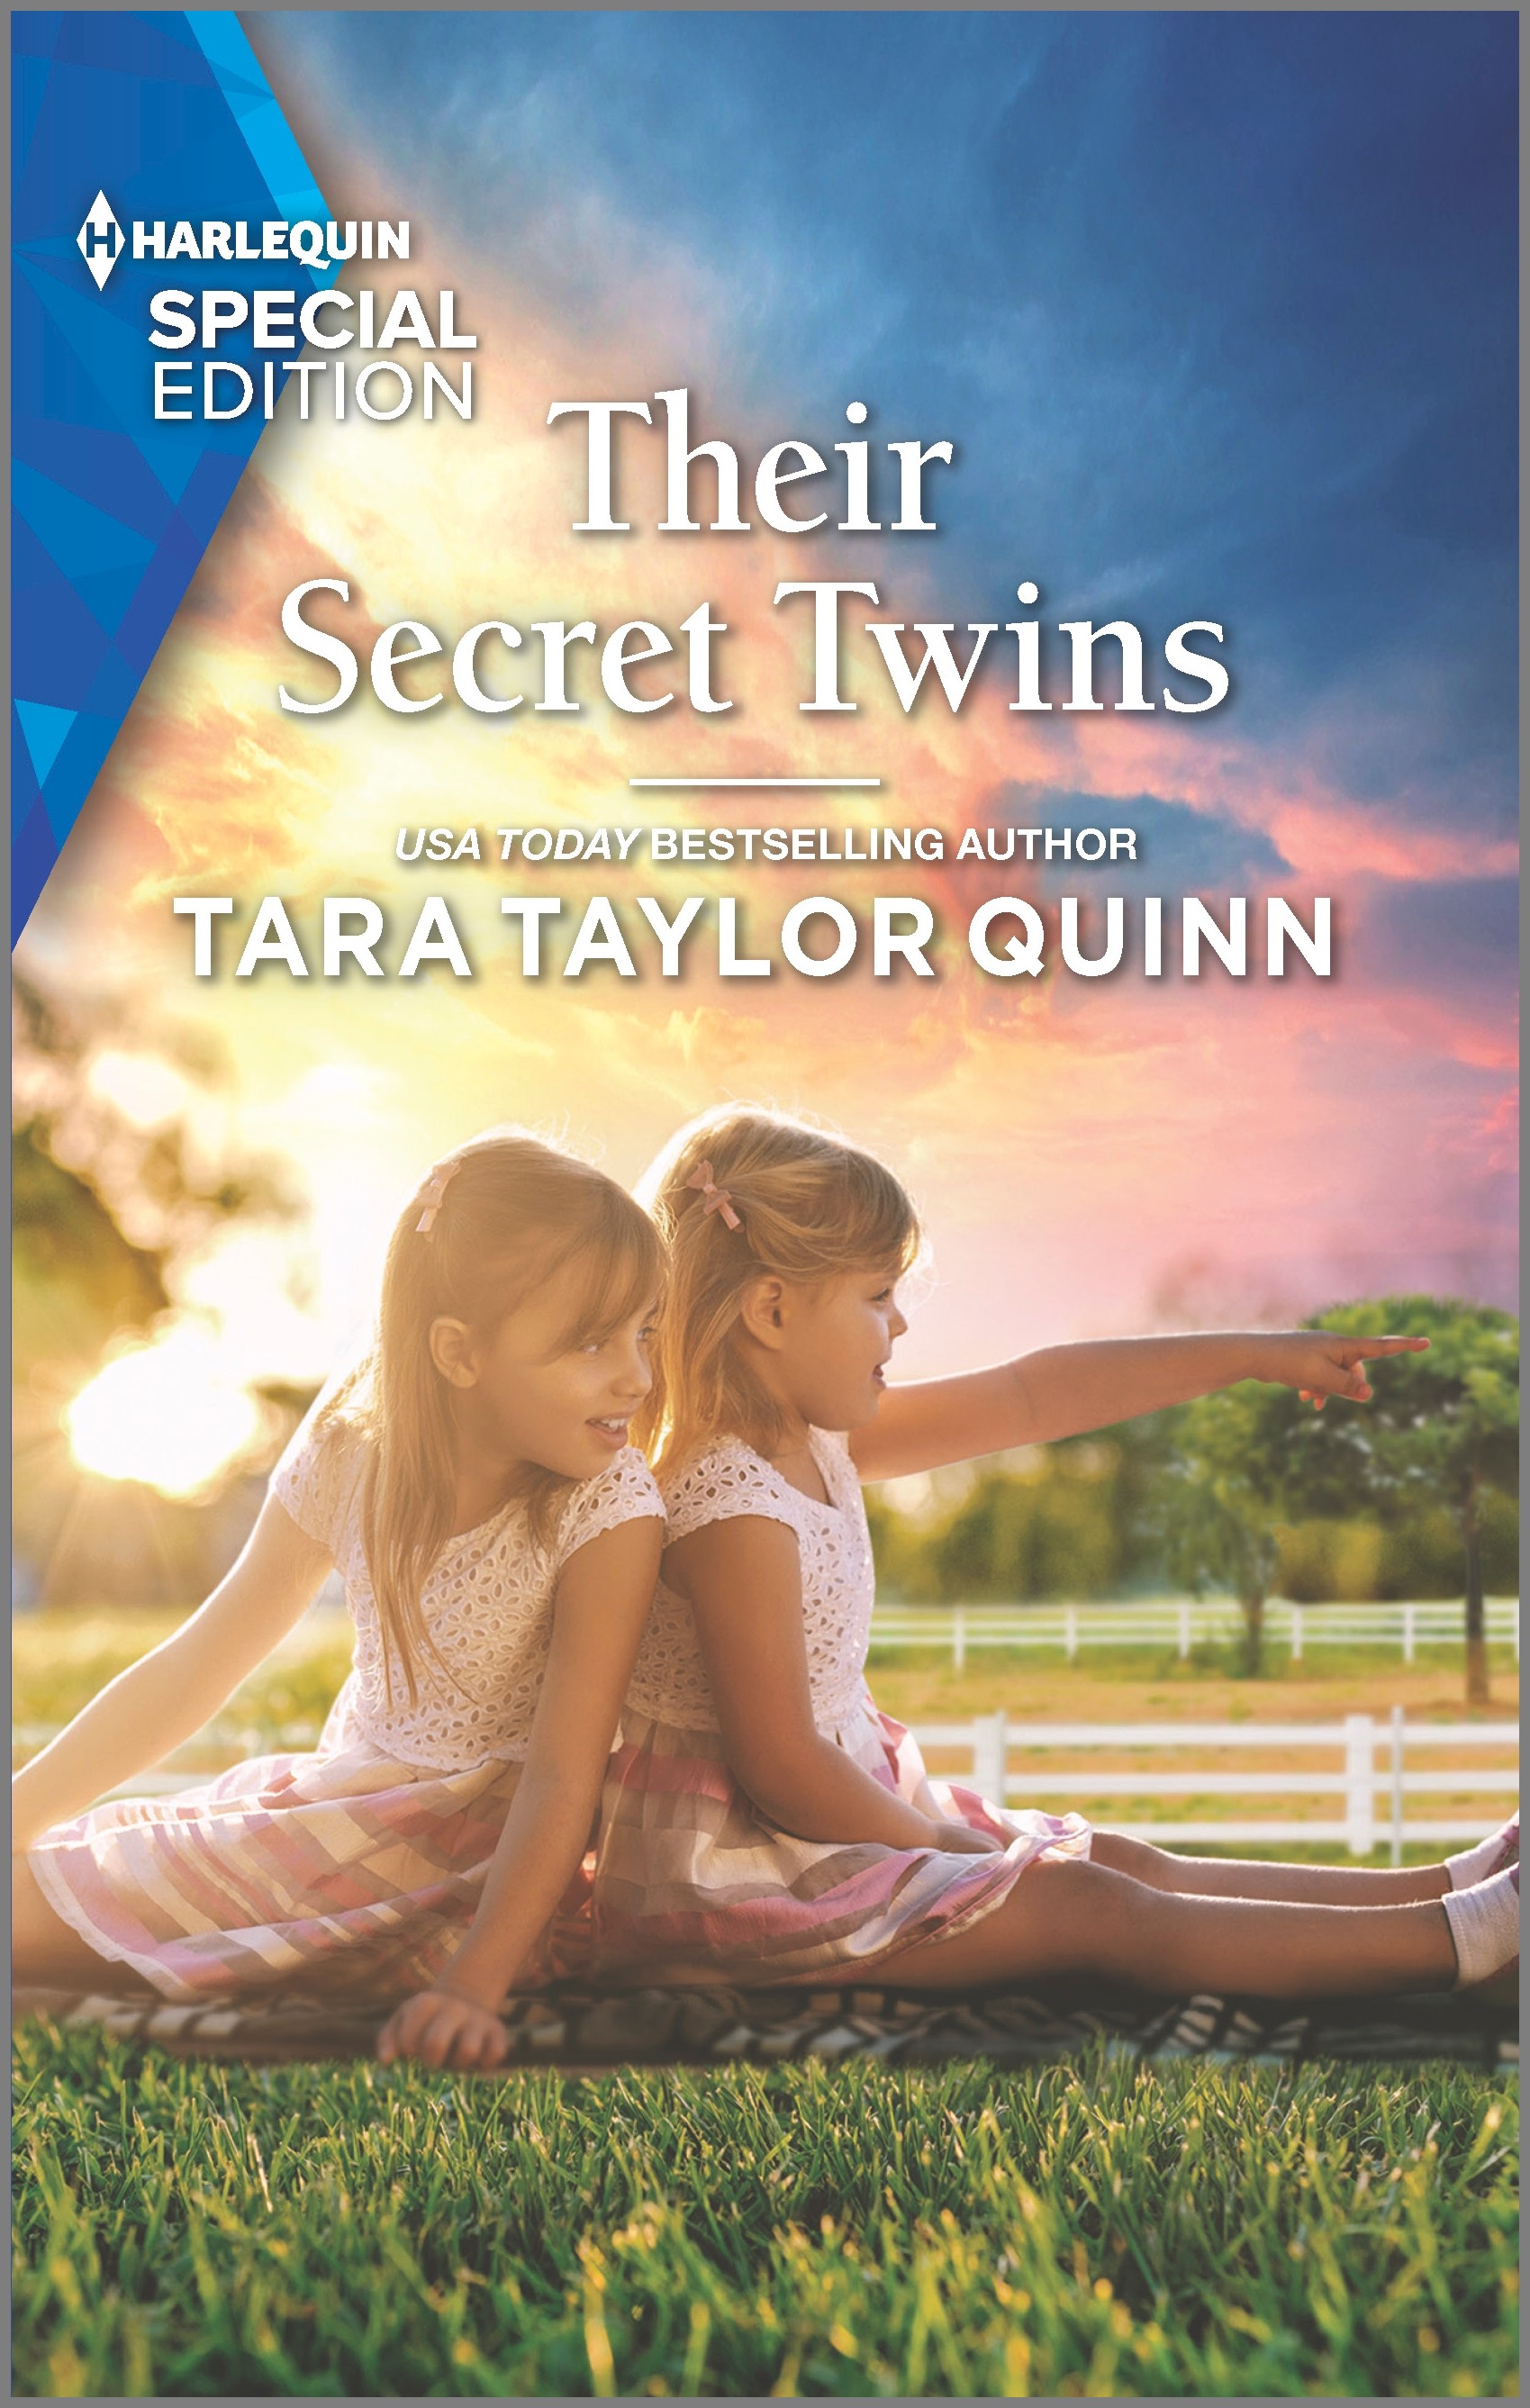 Cover image for THEIR SECRET TWINS by Tara Taylor Quinn, featuring two twin girls sitting in a field. One is pointing at something out of frame, and the other is looking where she is pointing with a smile on her face.